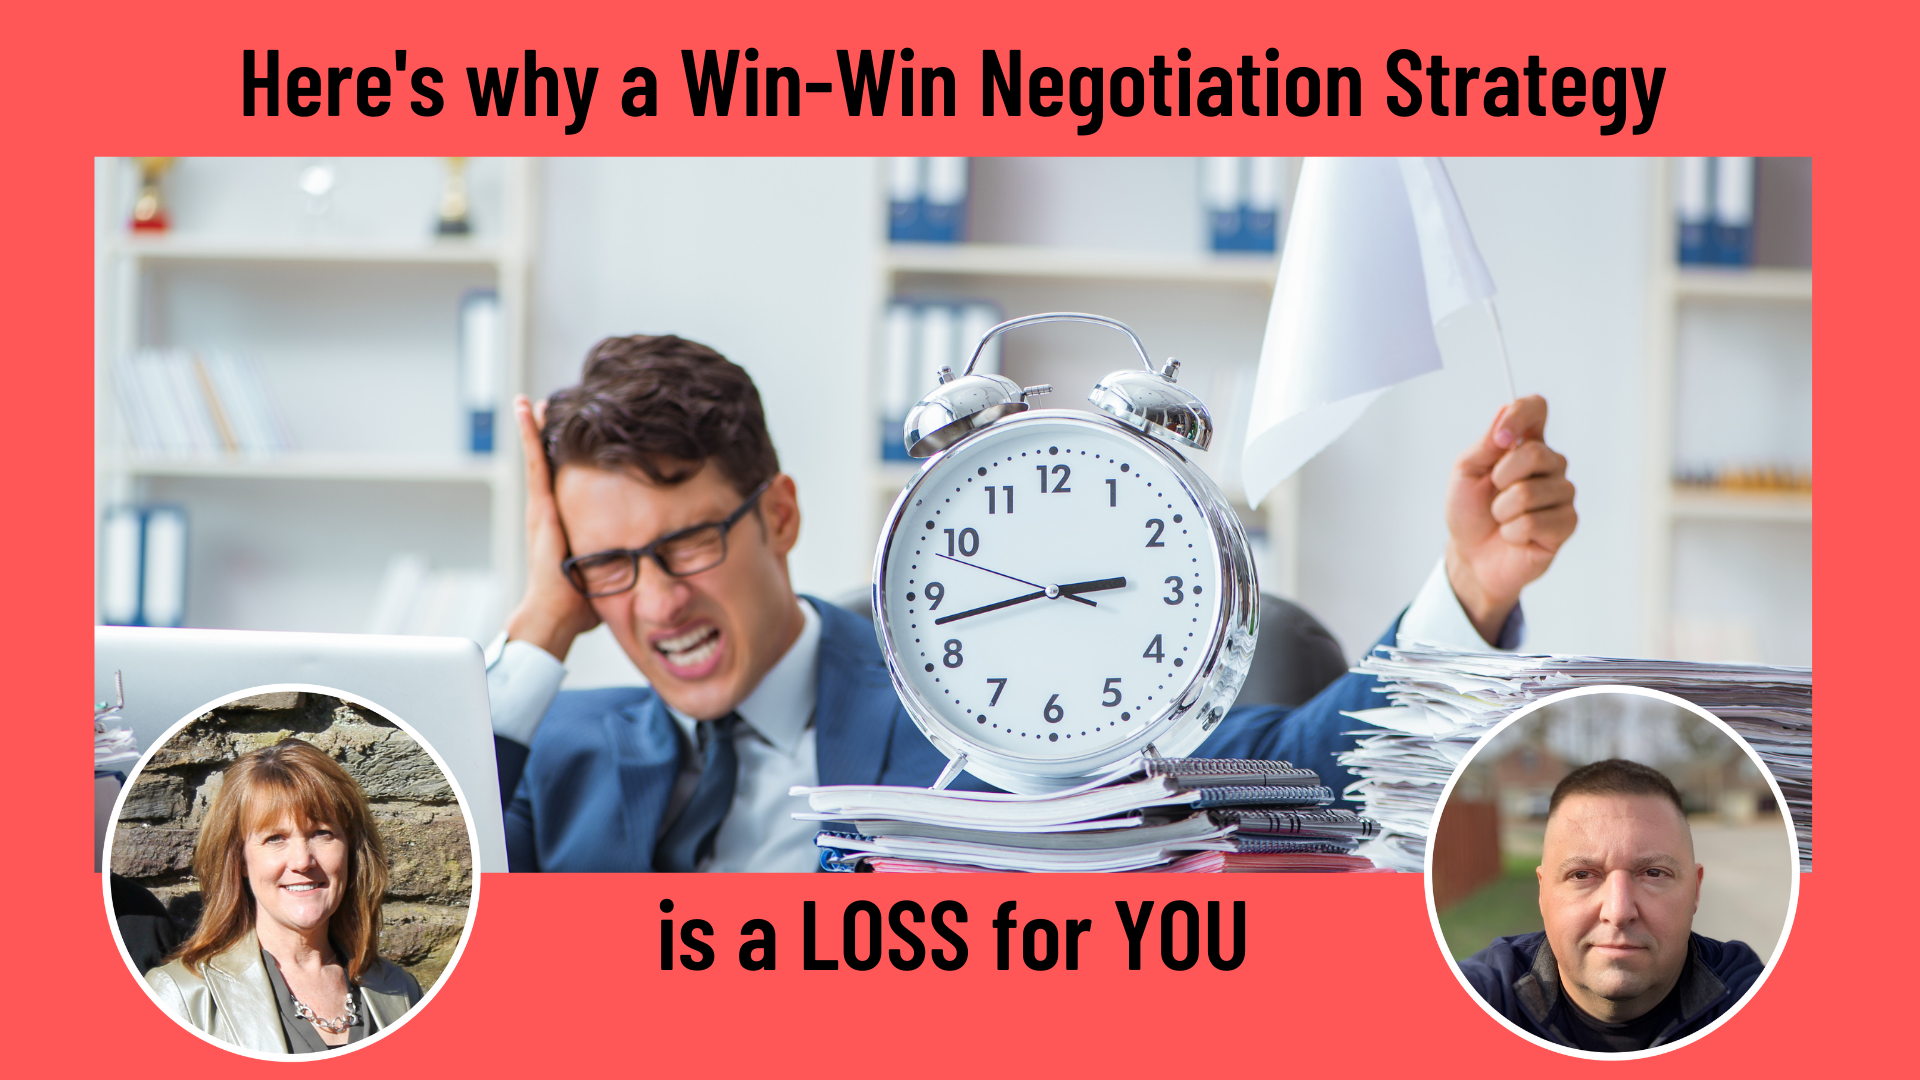 Here's why a Win-Win Negotiation Strategy is a LOSS for You